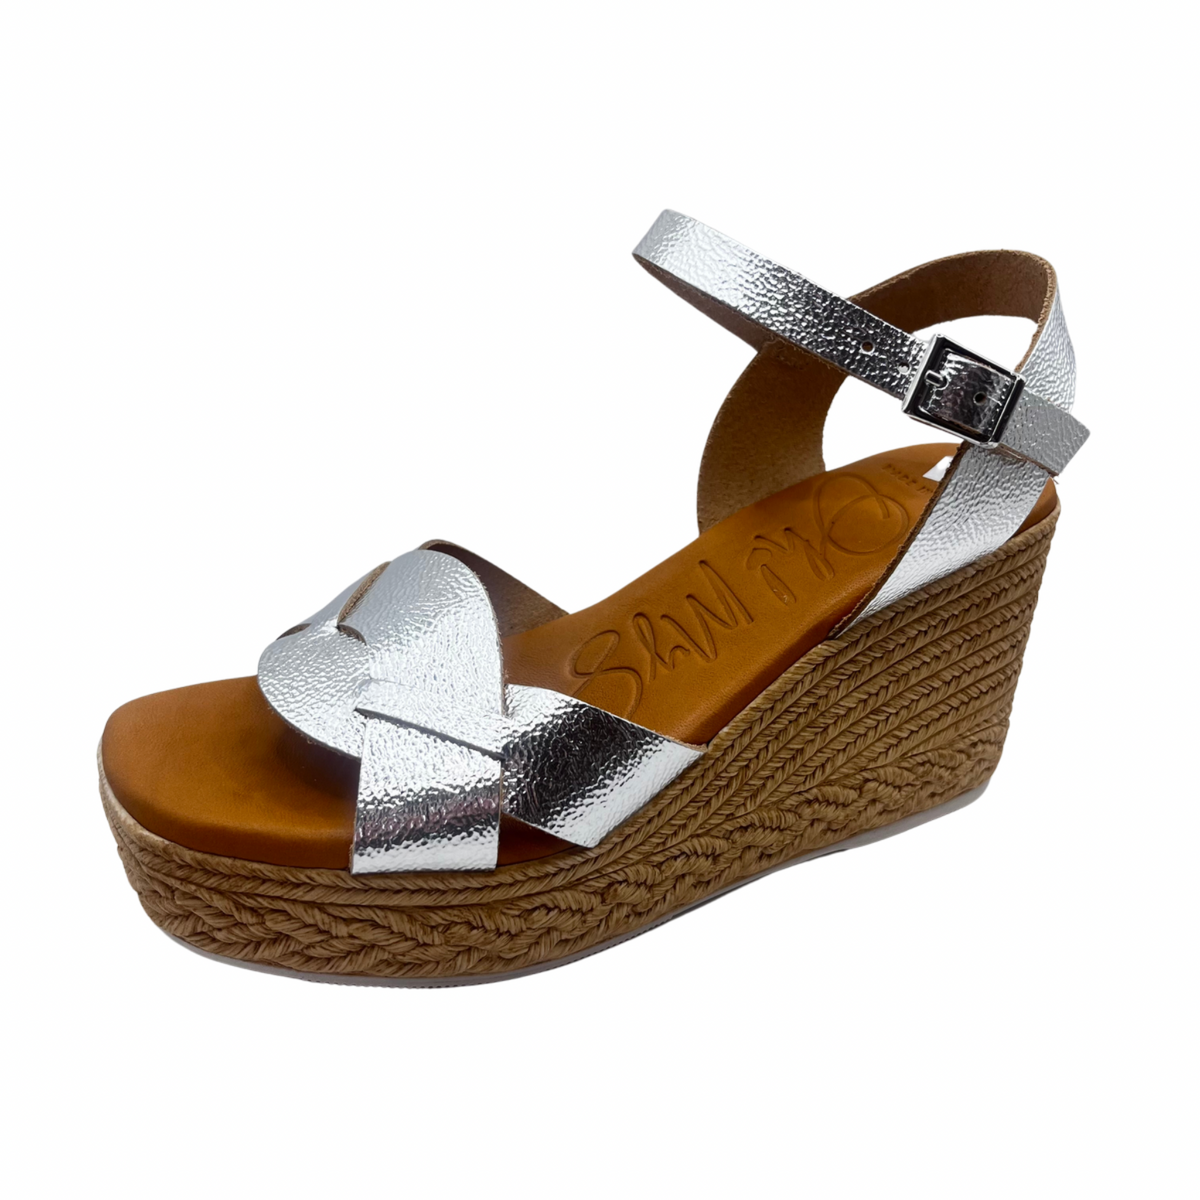 Oh My Sandals Woven Wedge Leather Silver Sandal